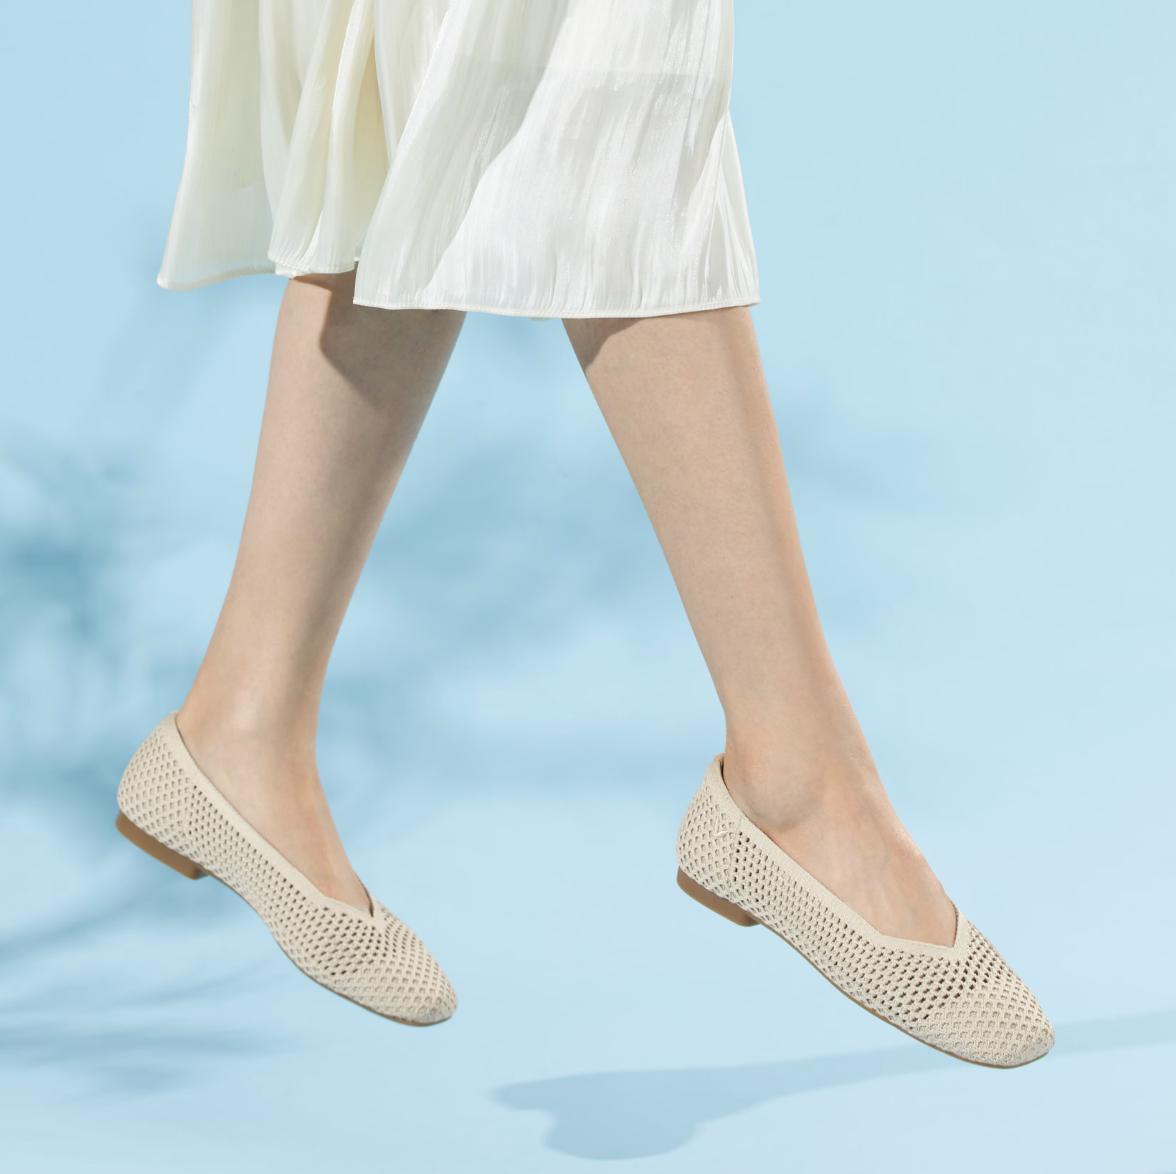 Mesh Flats Are the New Face of Impractical Footwear - FASHION Magazine